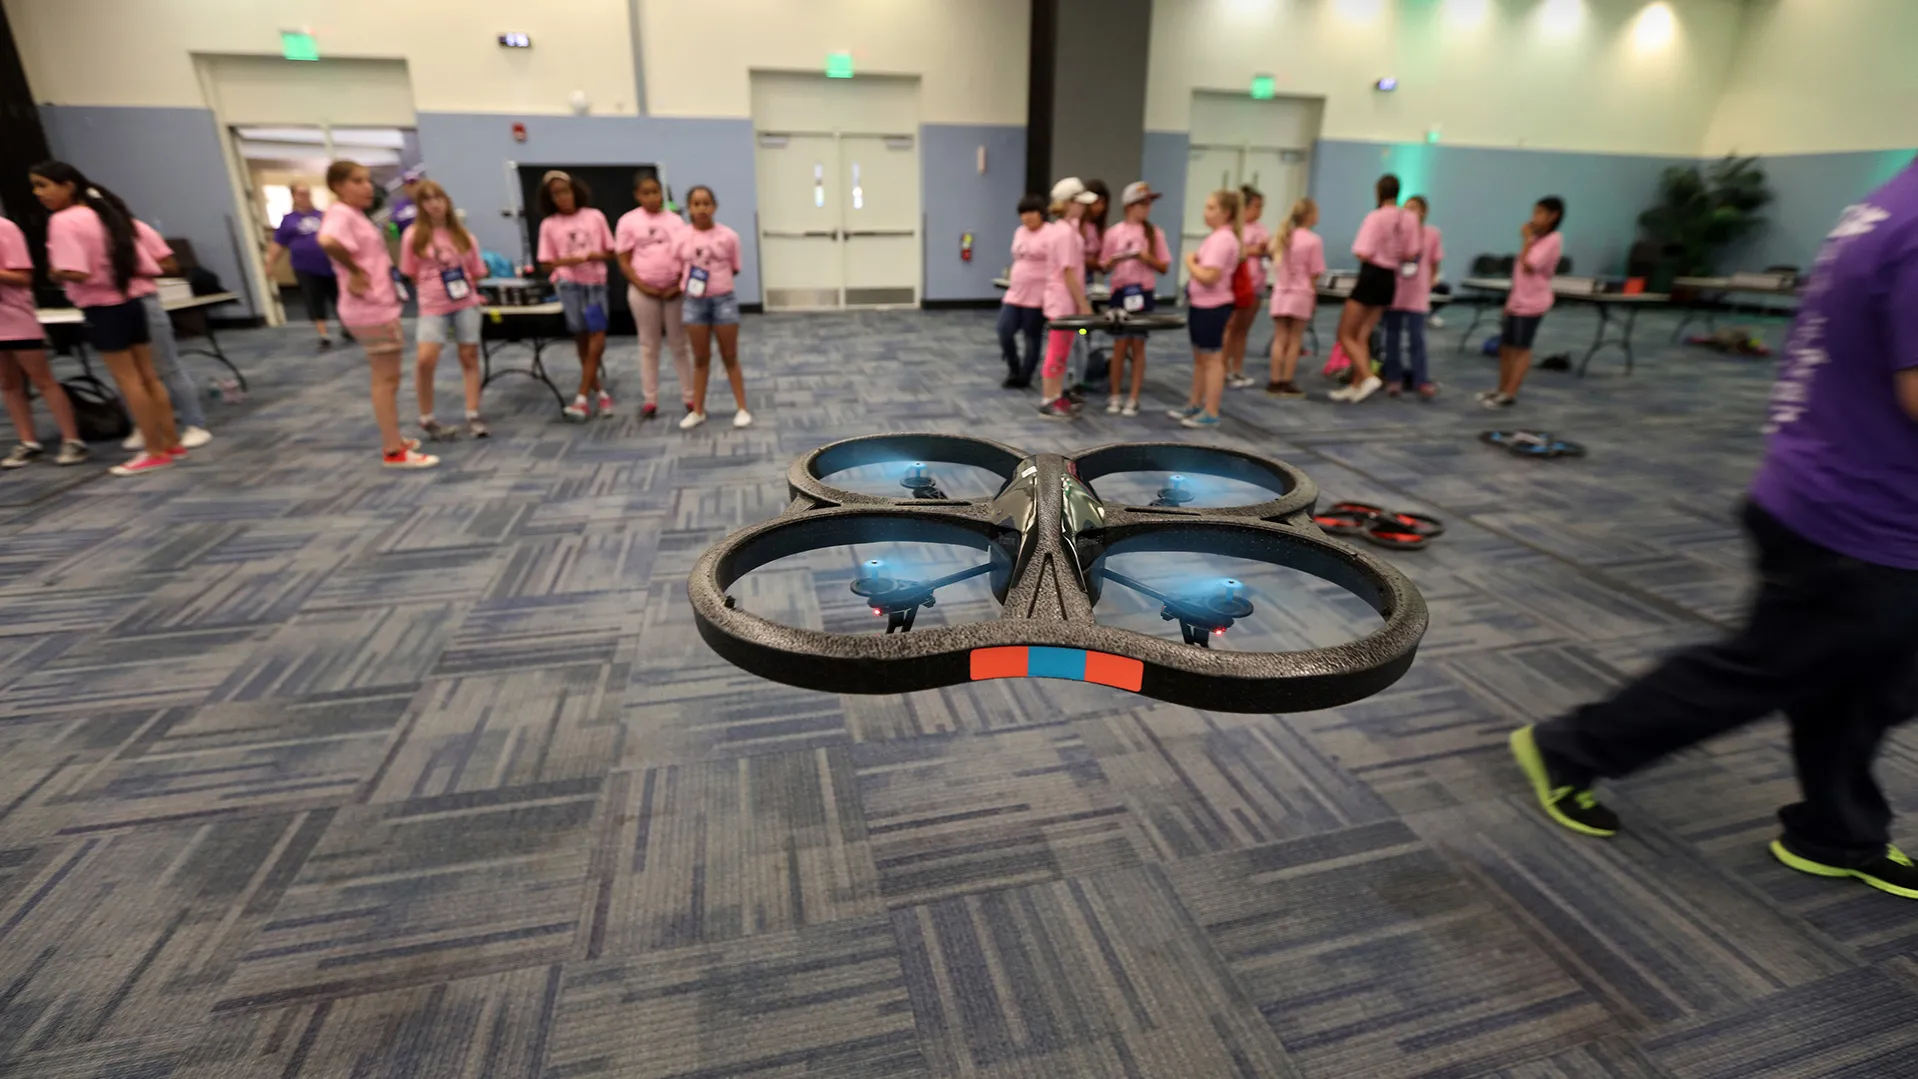 A drone flying during the 2022 GenCyber camp.